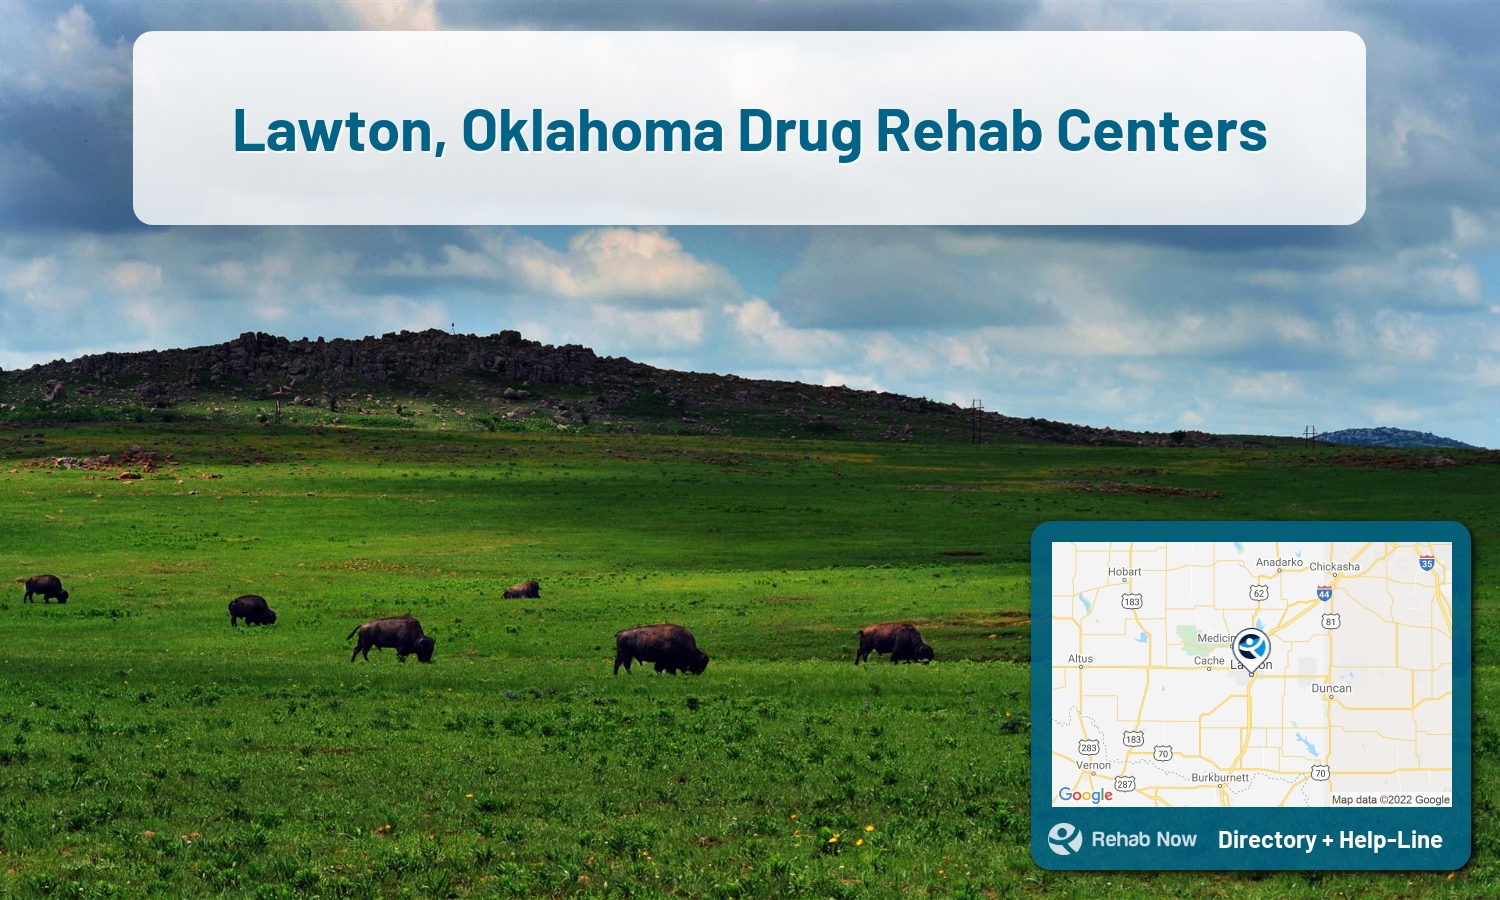 View options, availability, treatment methods, and more, for drug rehab and alcohol treatment in Lawton, Oklahoma